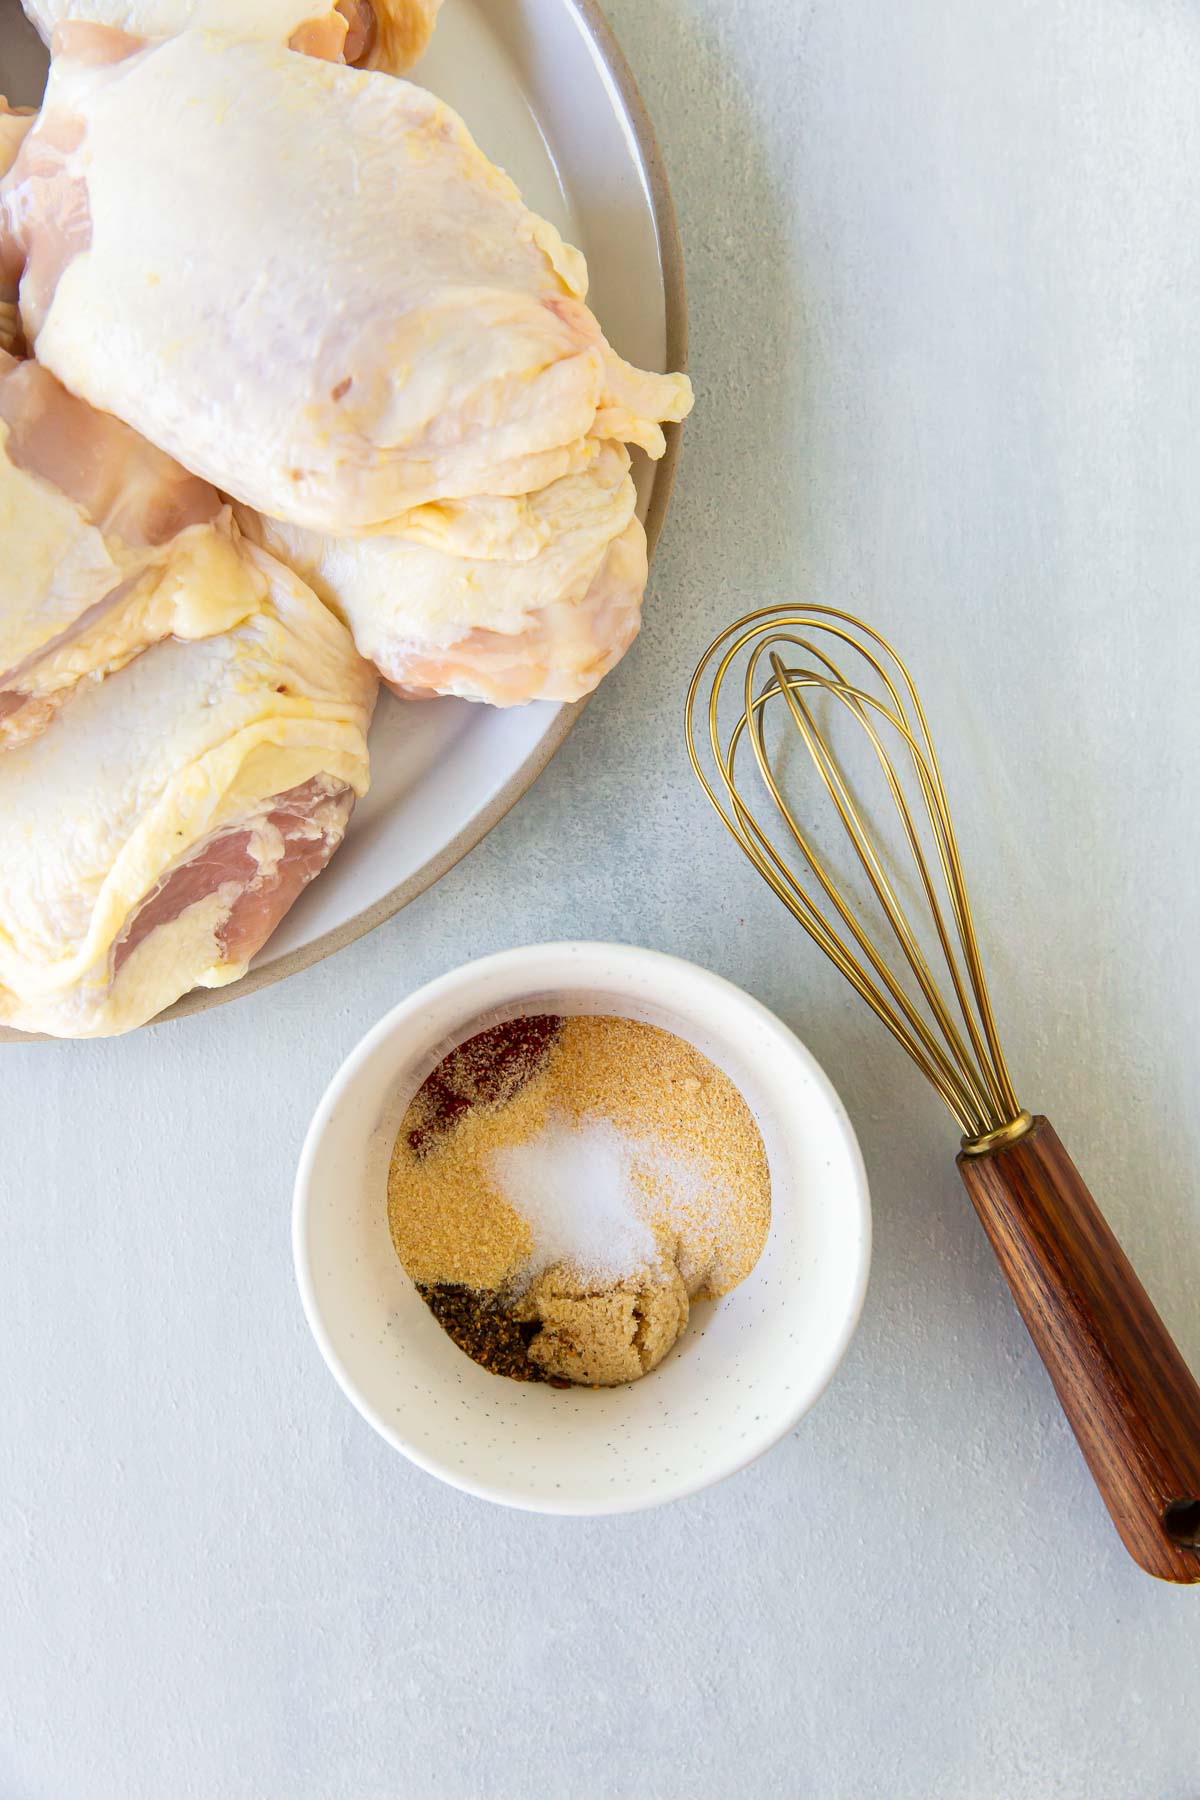 Seasonings in a small white bowl next to a whisk and plate of raw chicken thighs.